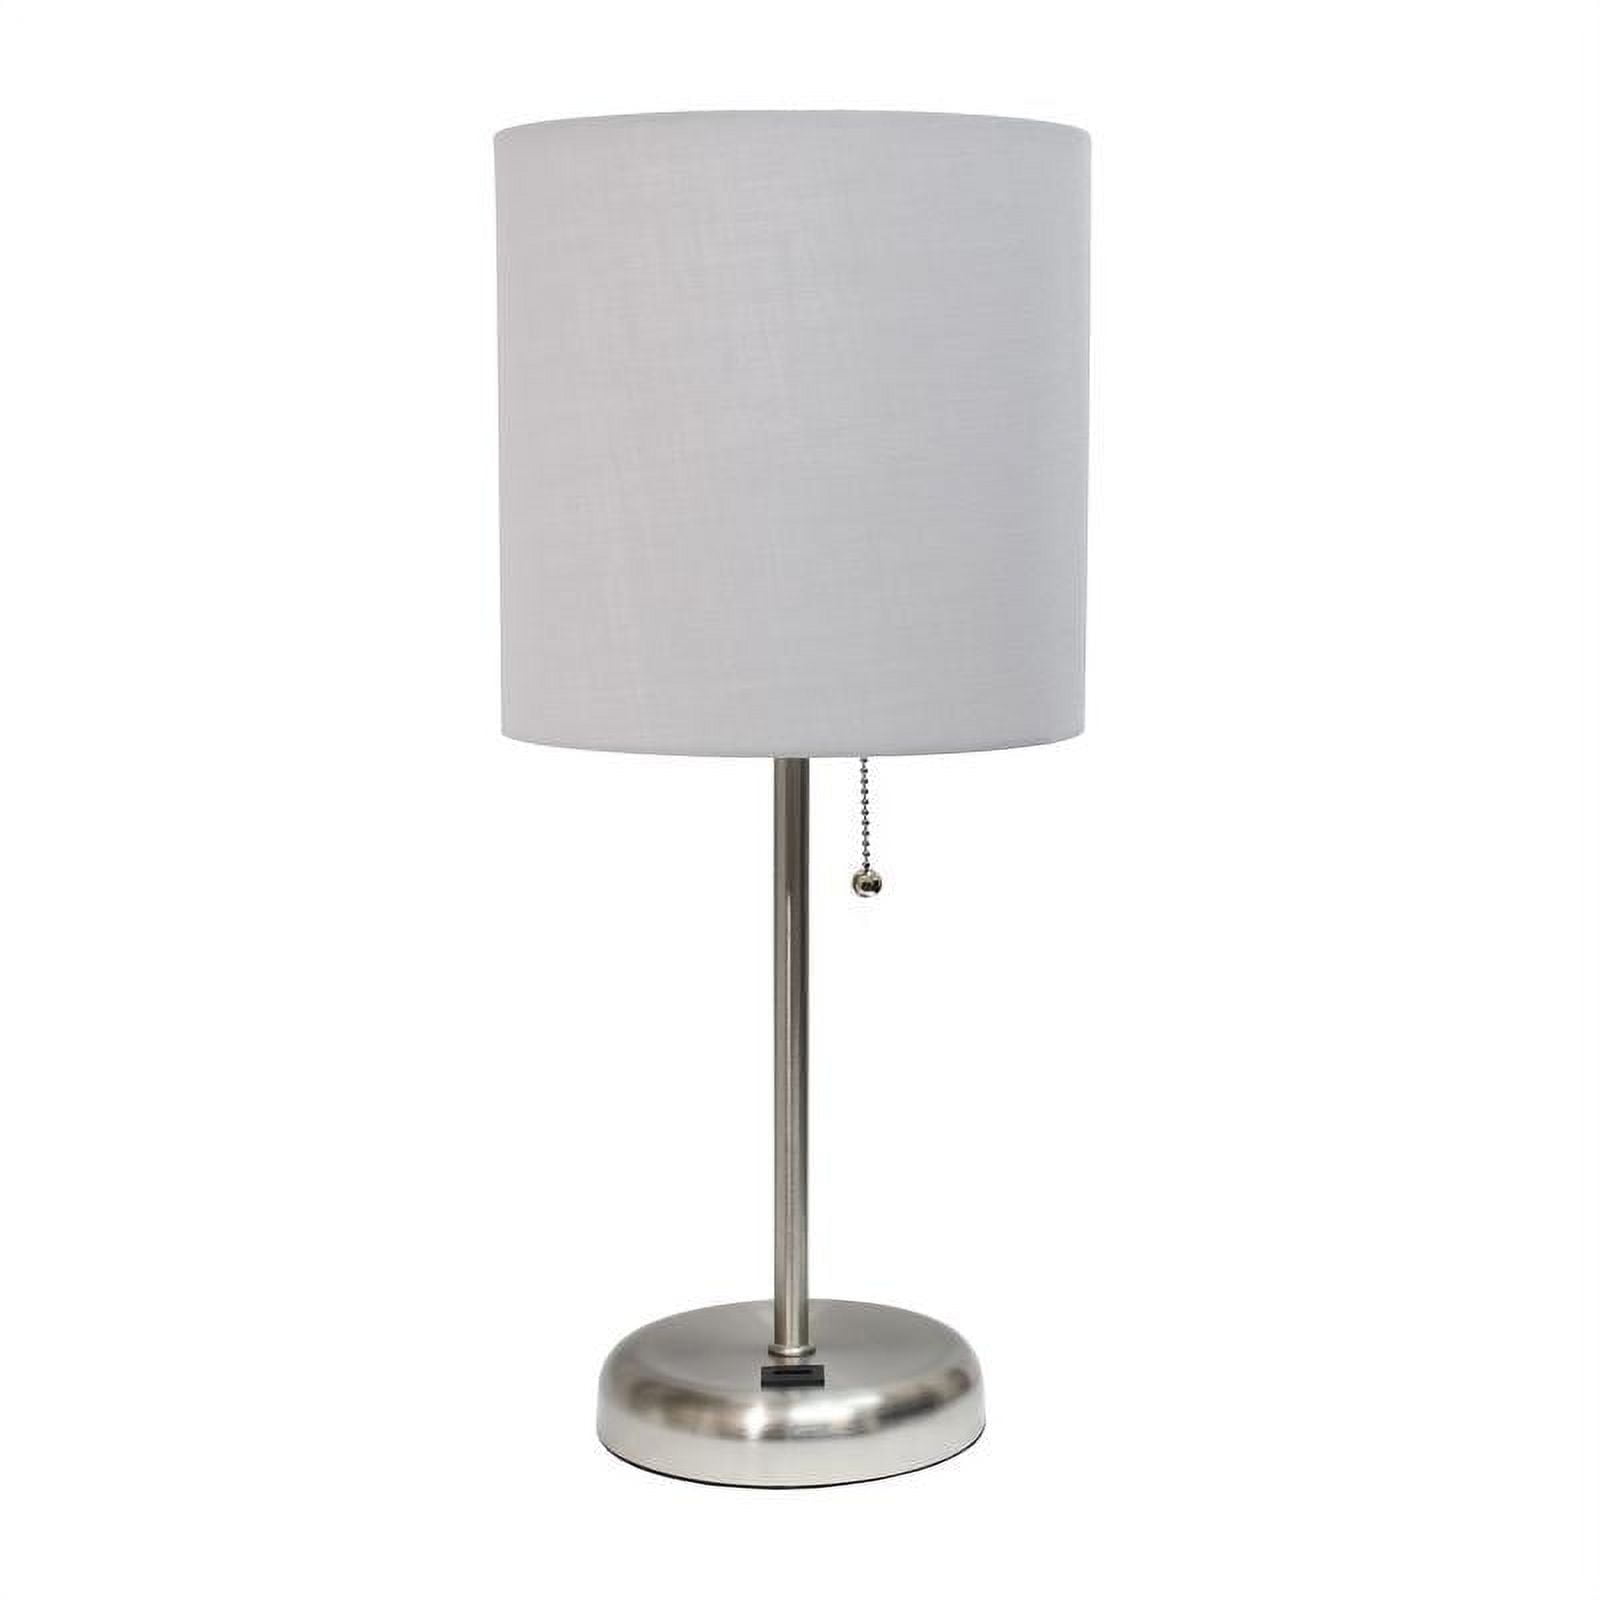 Lt2044-gry 60w Stick Lamp With Usb Charging Port & Fabric Shade - Gray